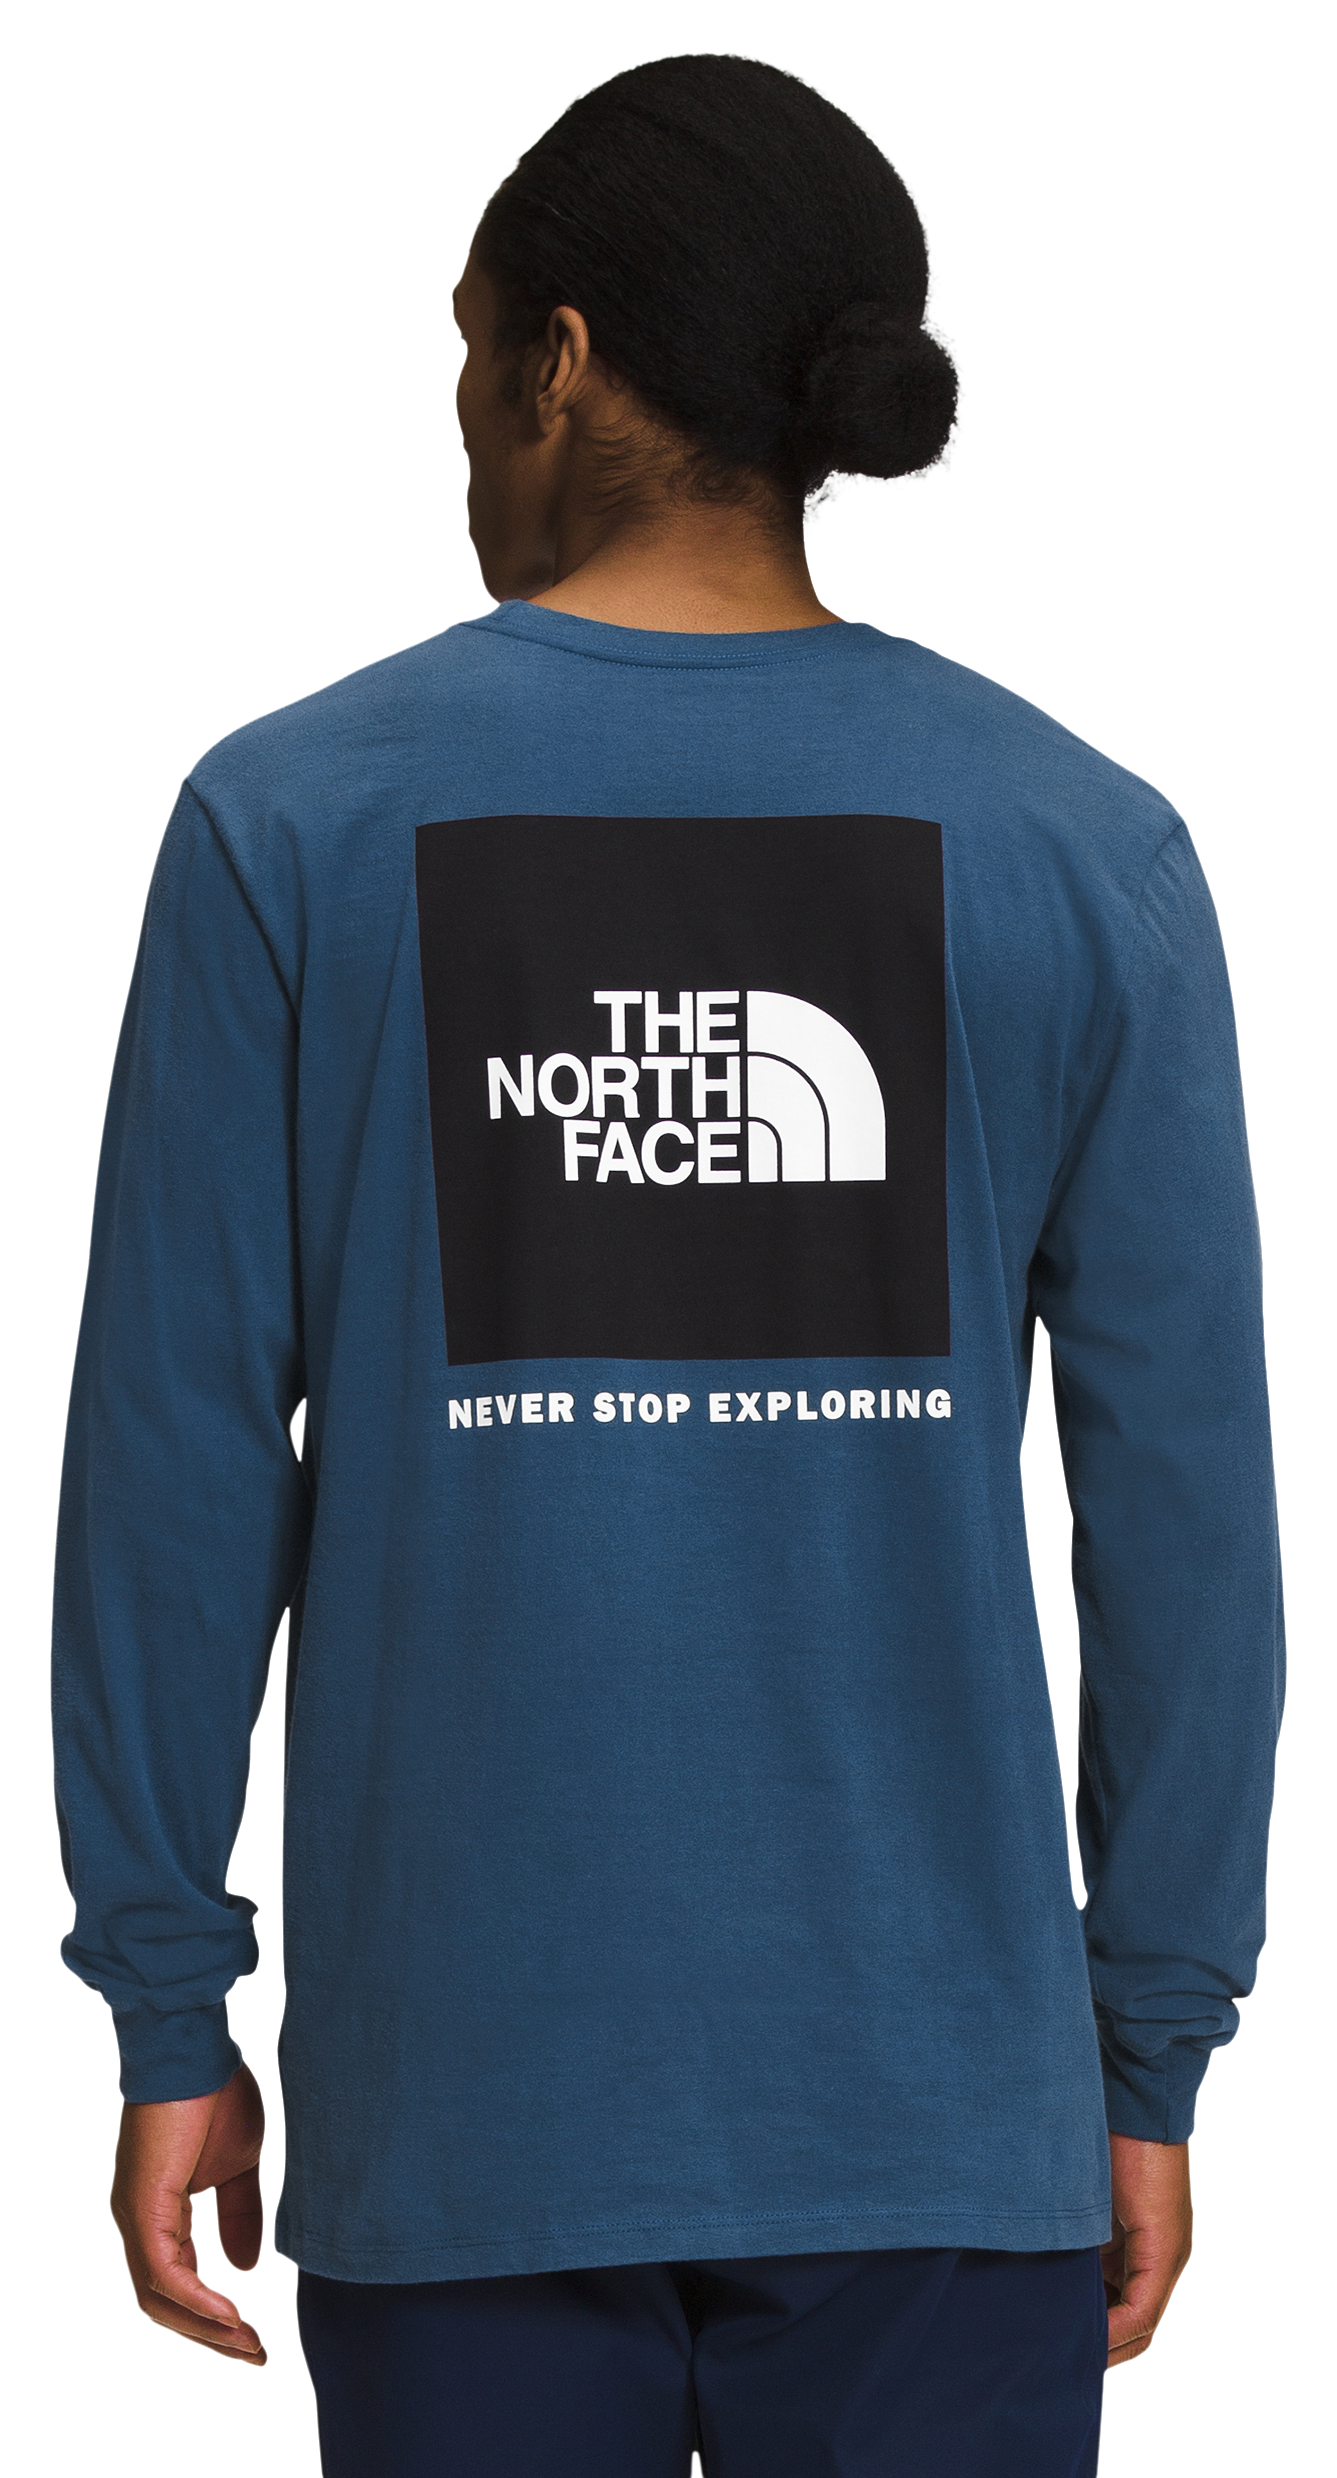 The North Face Box NSE Long-Sleeve Shirt for Men - Shady Blue/TNF Black - S